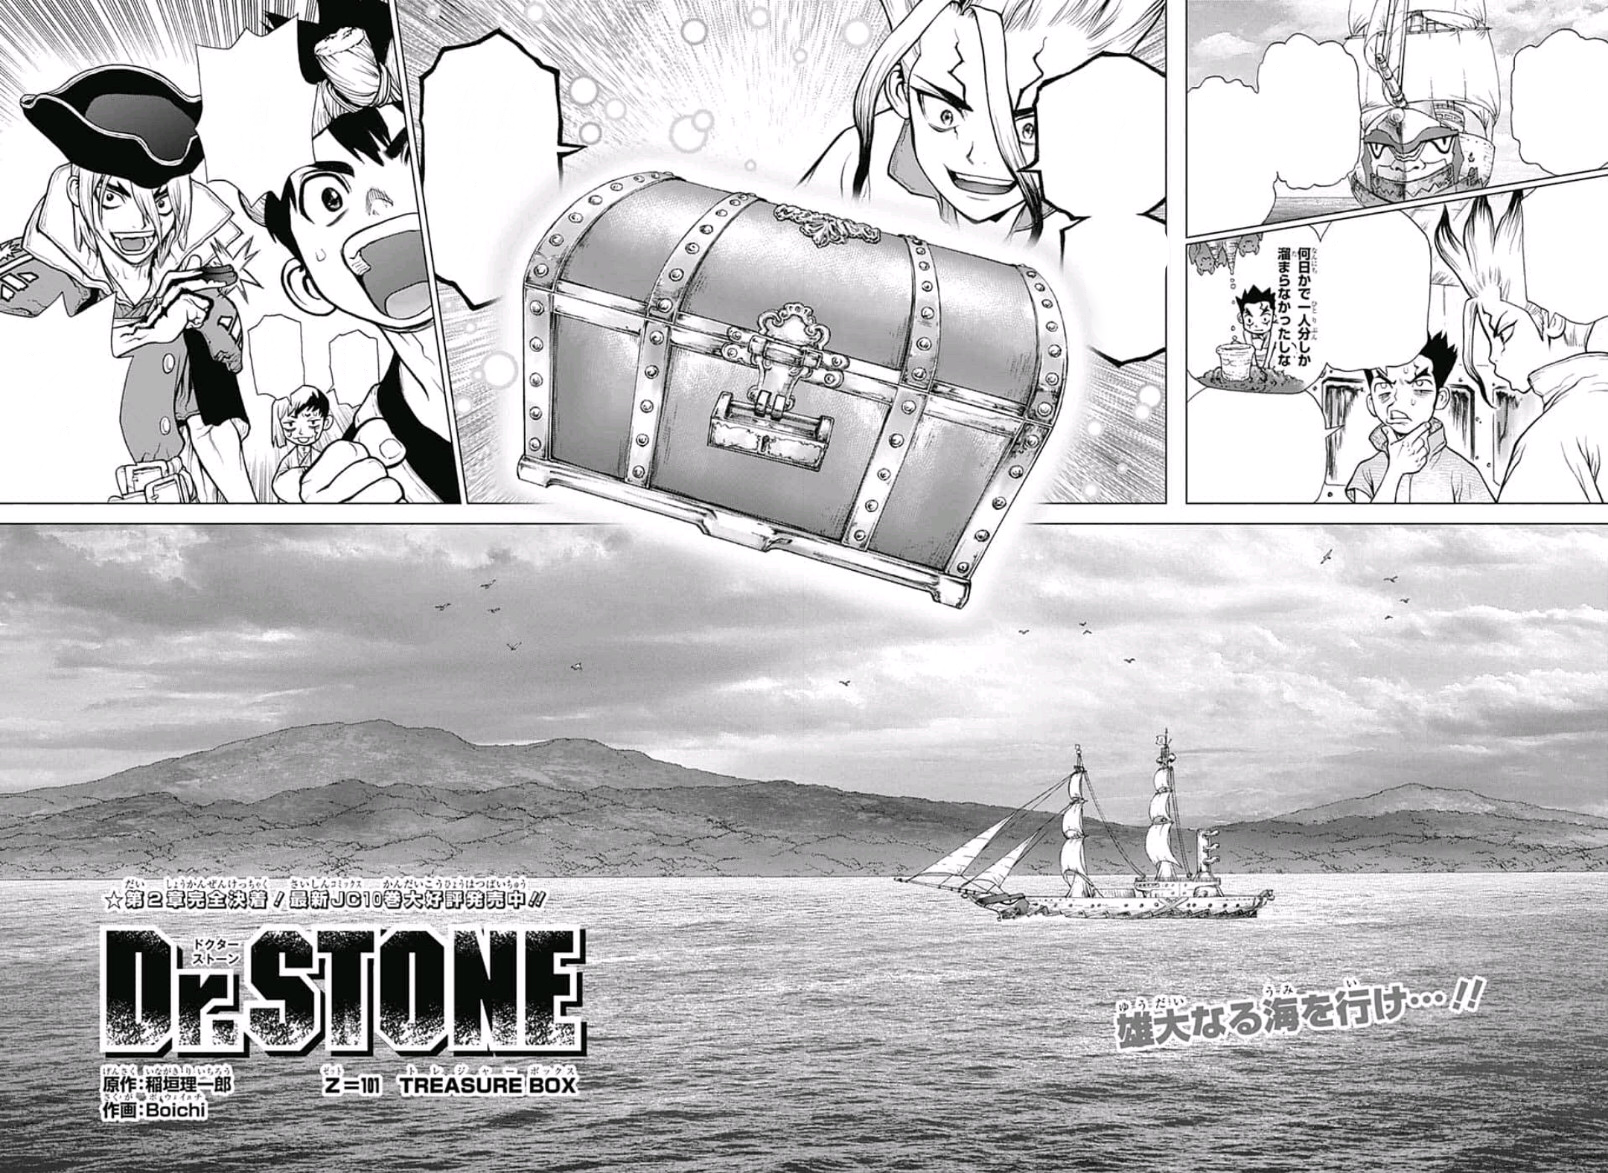 Dr. Stone Season 3 Episode 15: Spoilers from manga; Release date, where to  watch and more